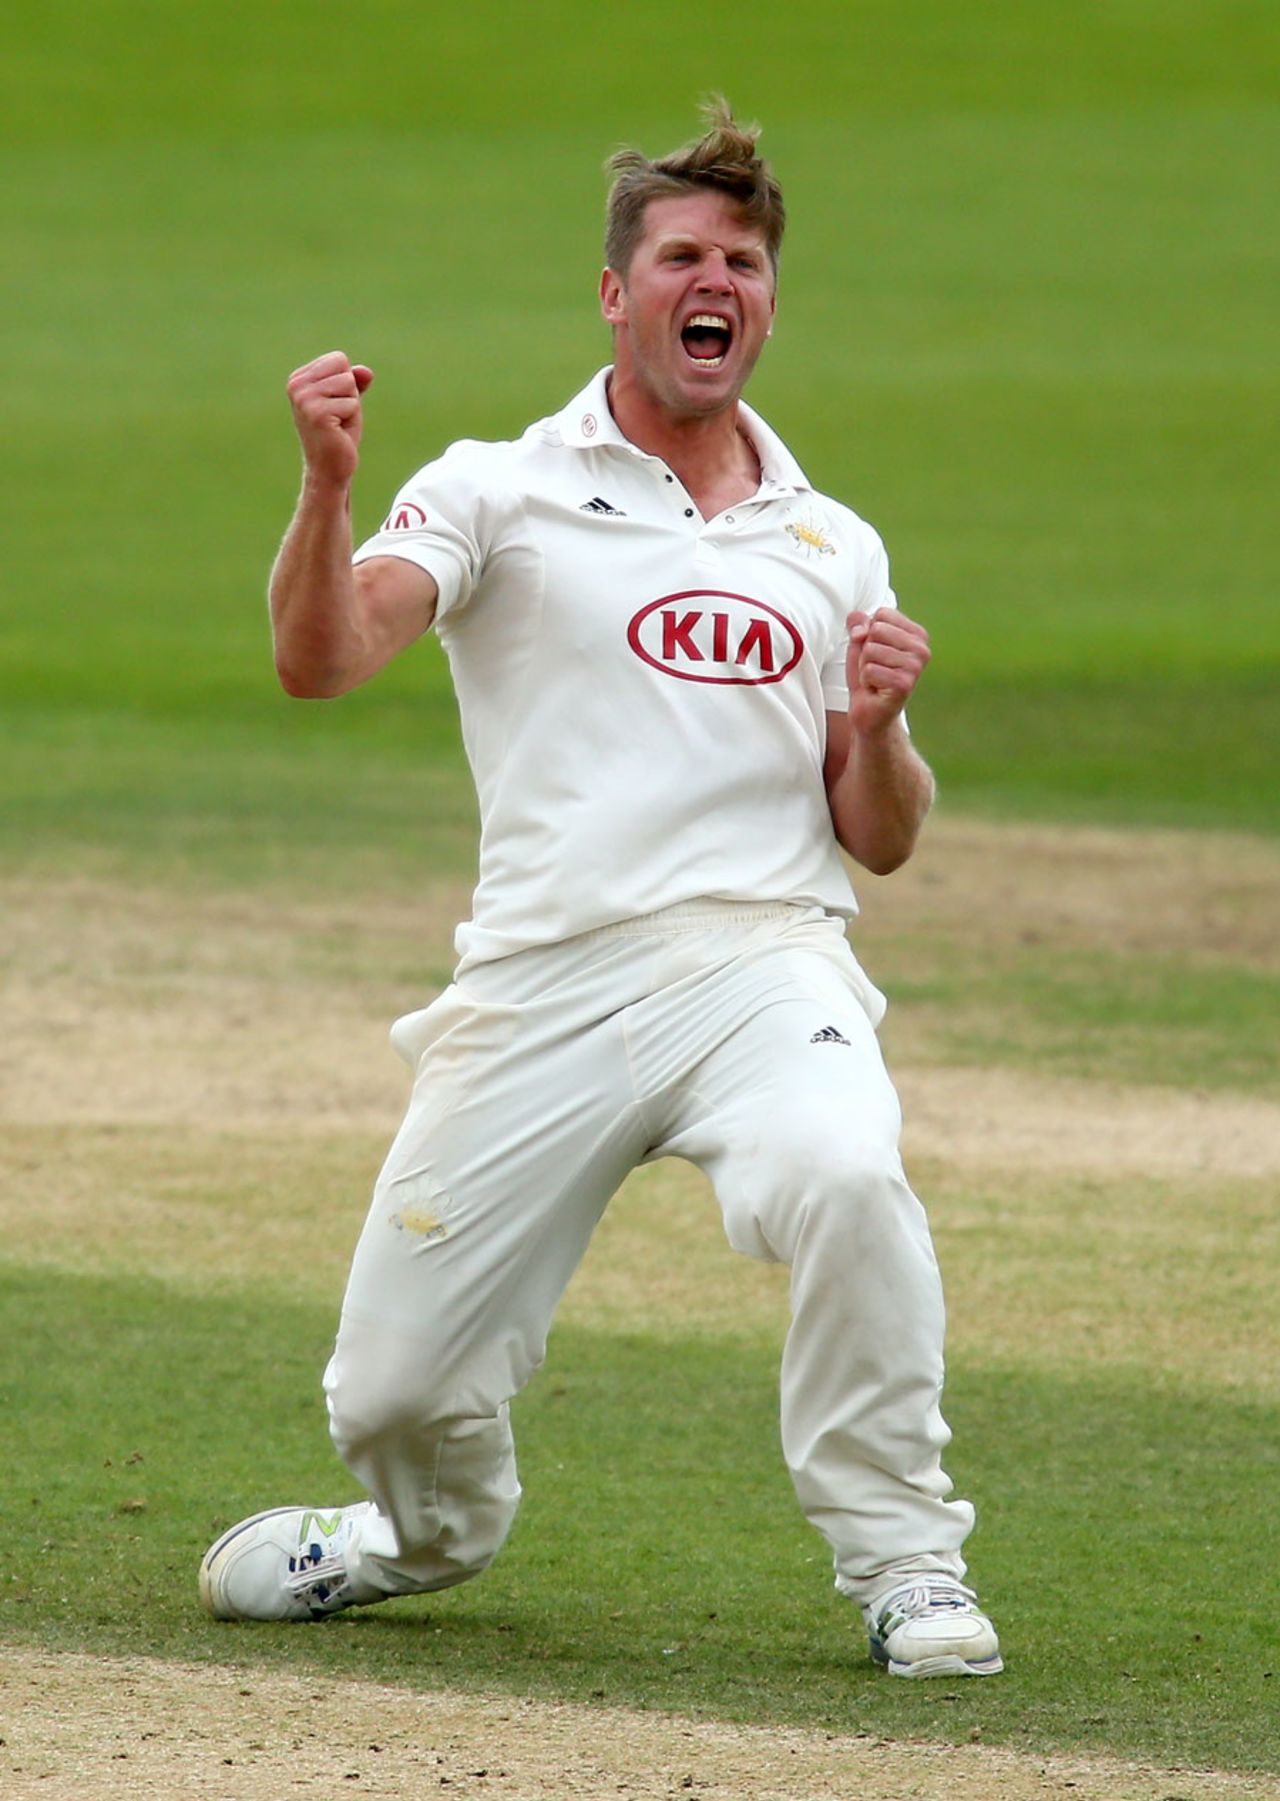 Stuart Meaker celebrates a wicket, Surrey v Somerset, County Championship, Division One, The Oval, 3rd day, September 21, 2017